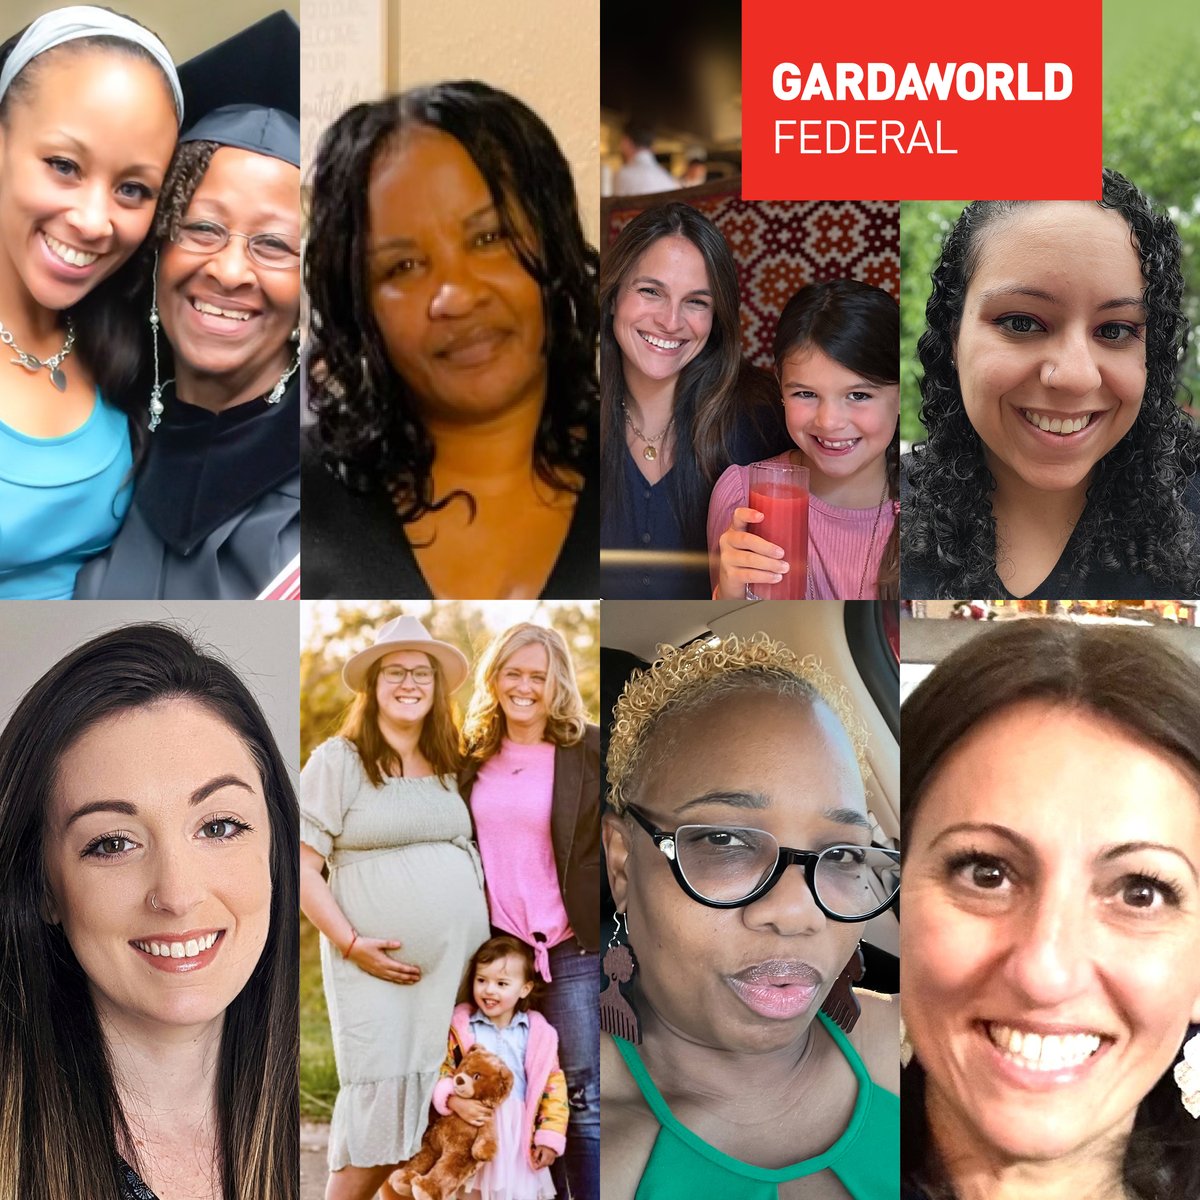 To all the mothers who nurture, support, and inspire, GardaWorld Federal wishes you a Happy Mother's Day!

#MothersDay